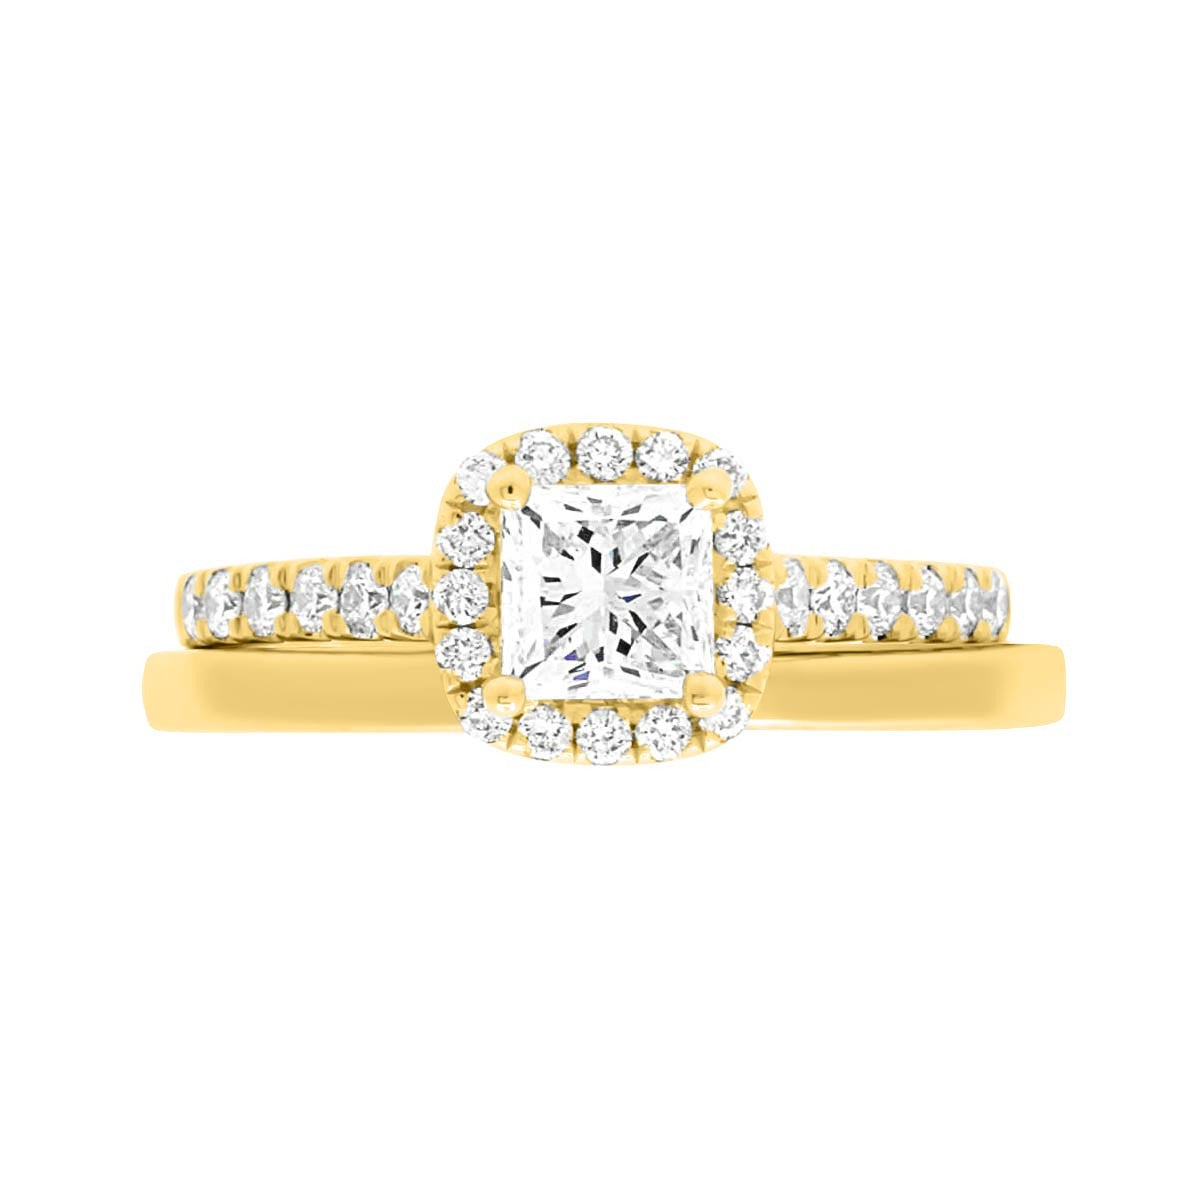 Princess Cut Diamond Halo Ring in yellow gold with a matching gold wedding ring